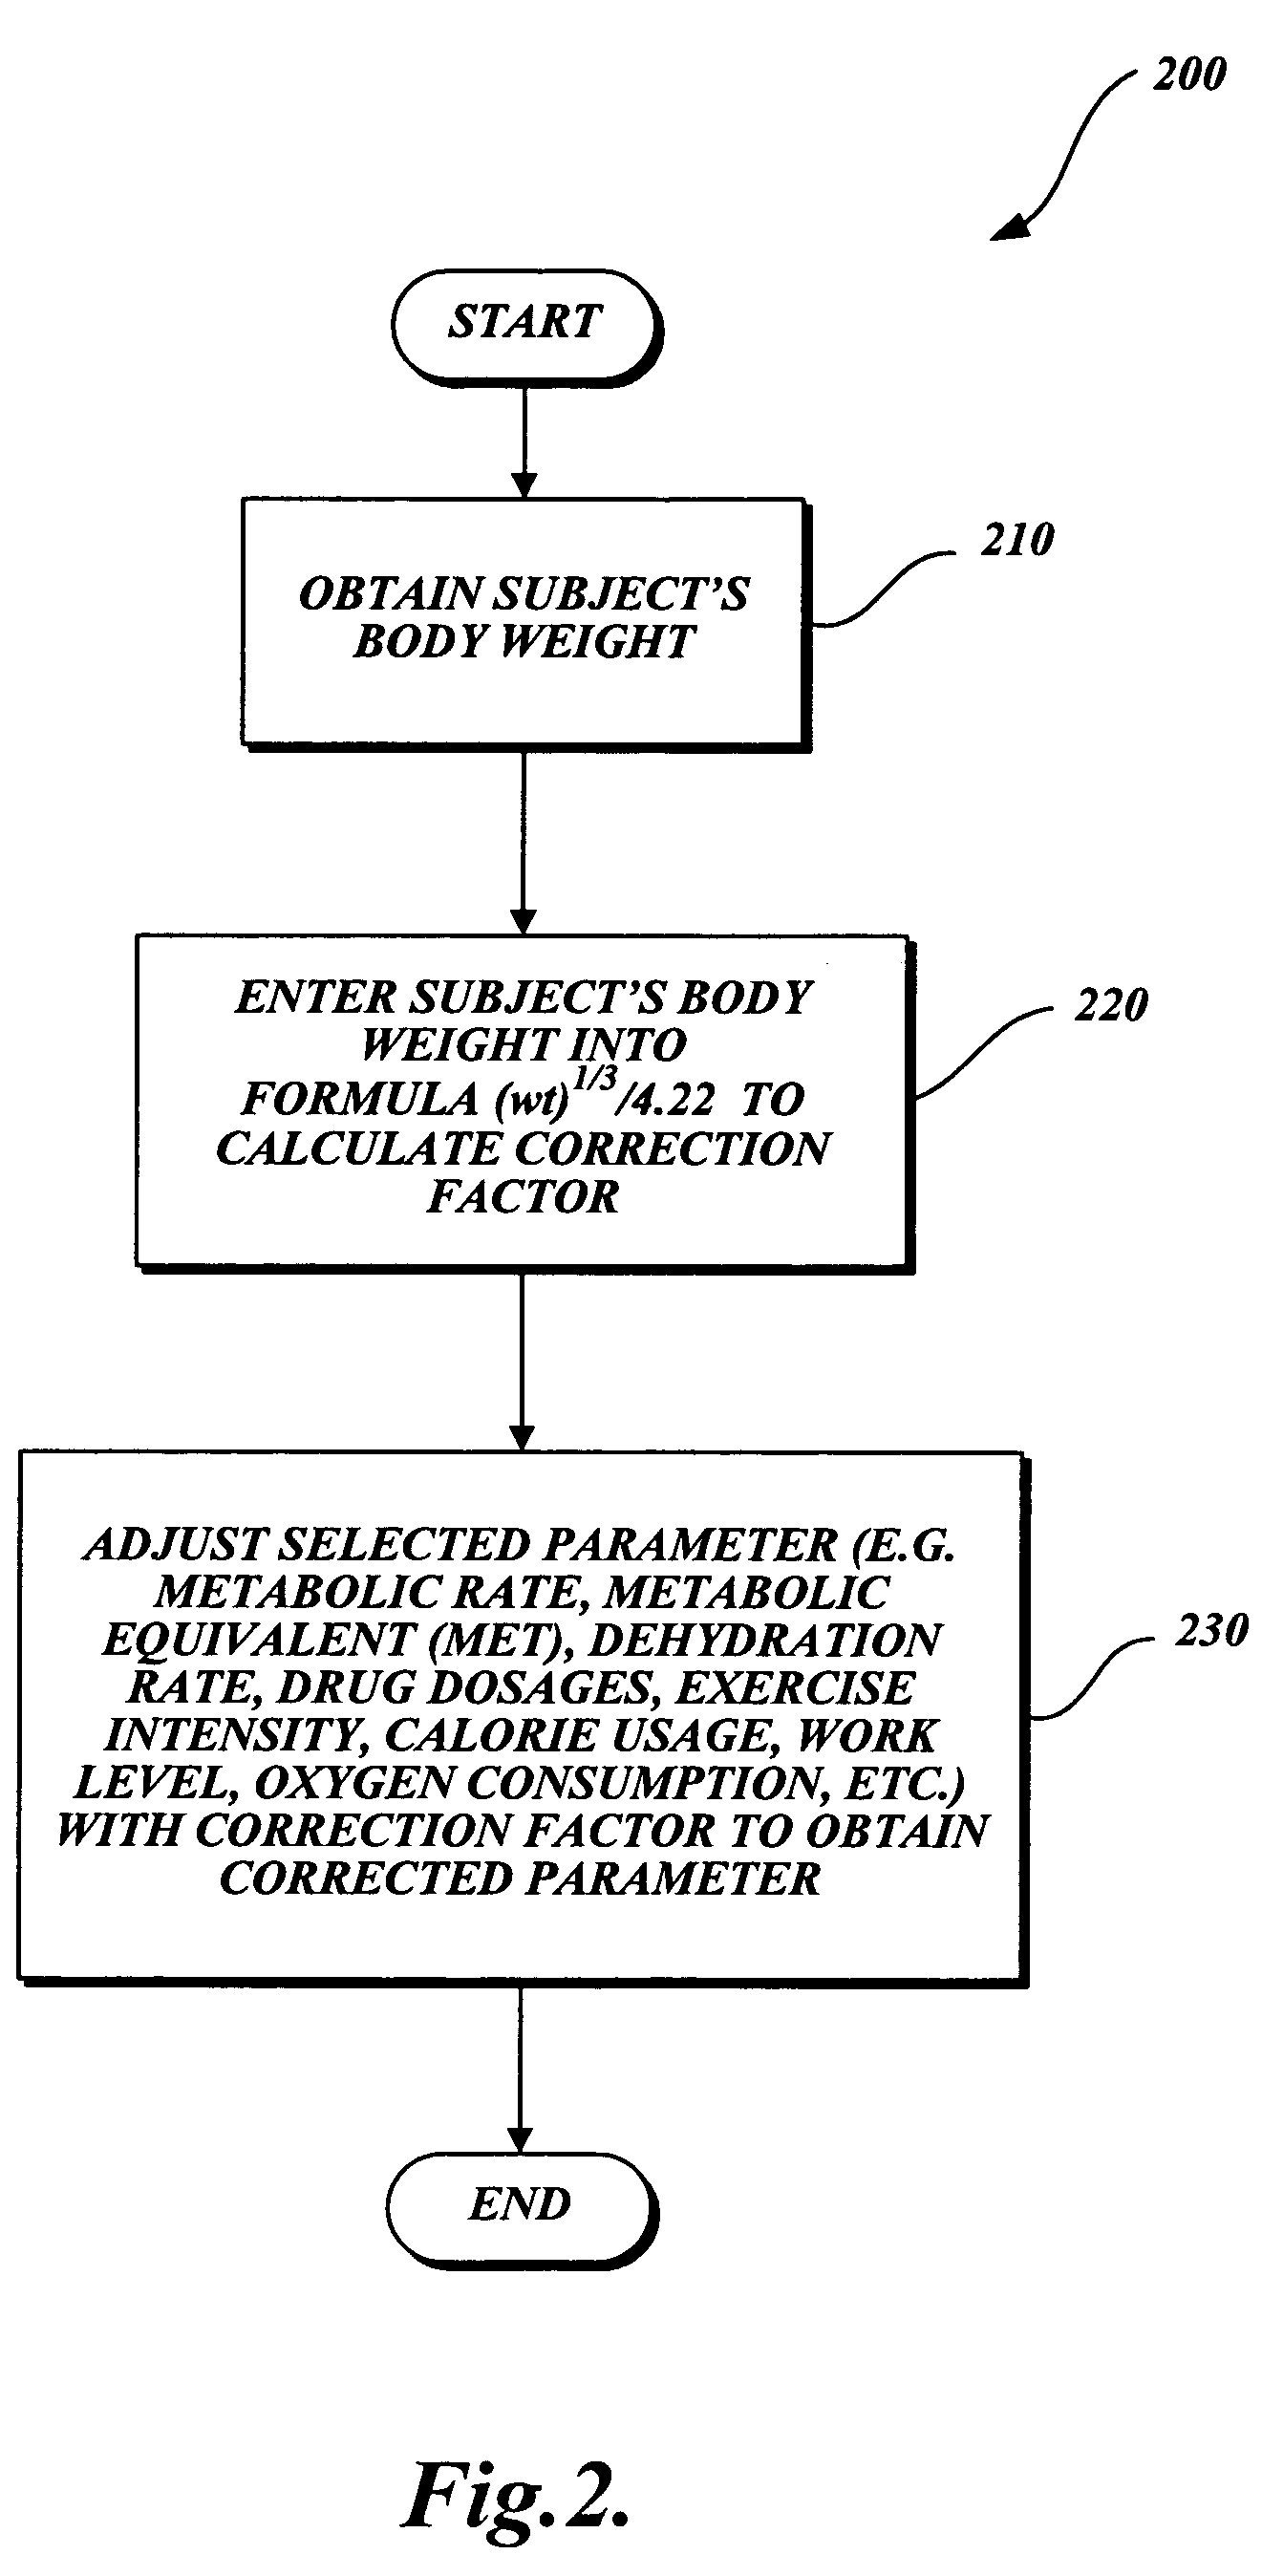 Method for adjusting metabolic related parameters according to a subject's body weight